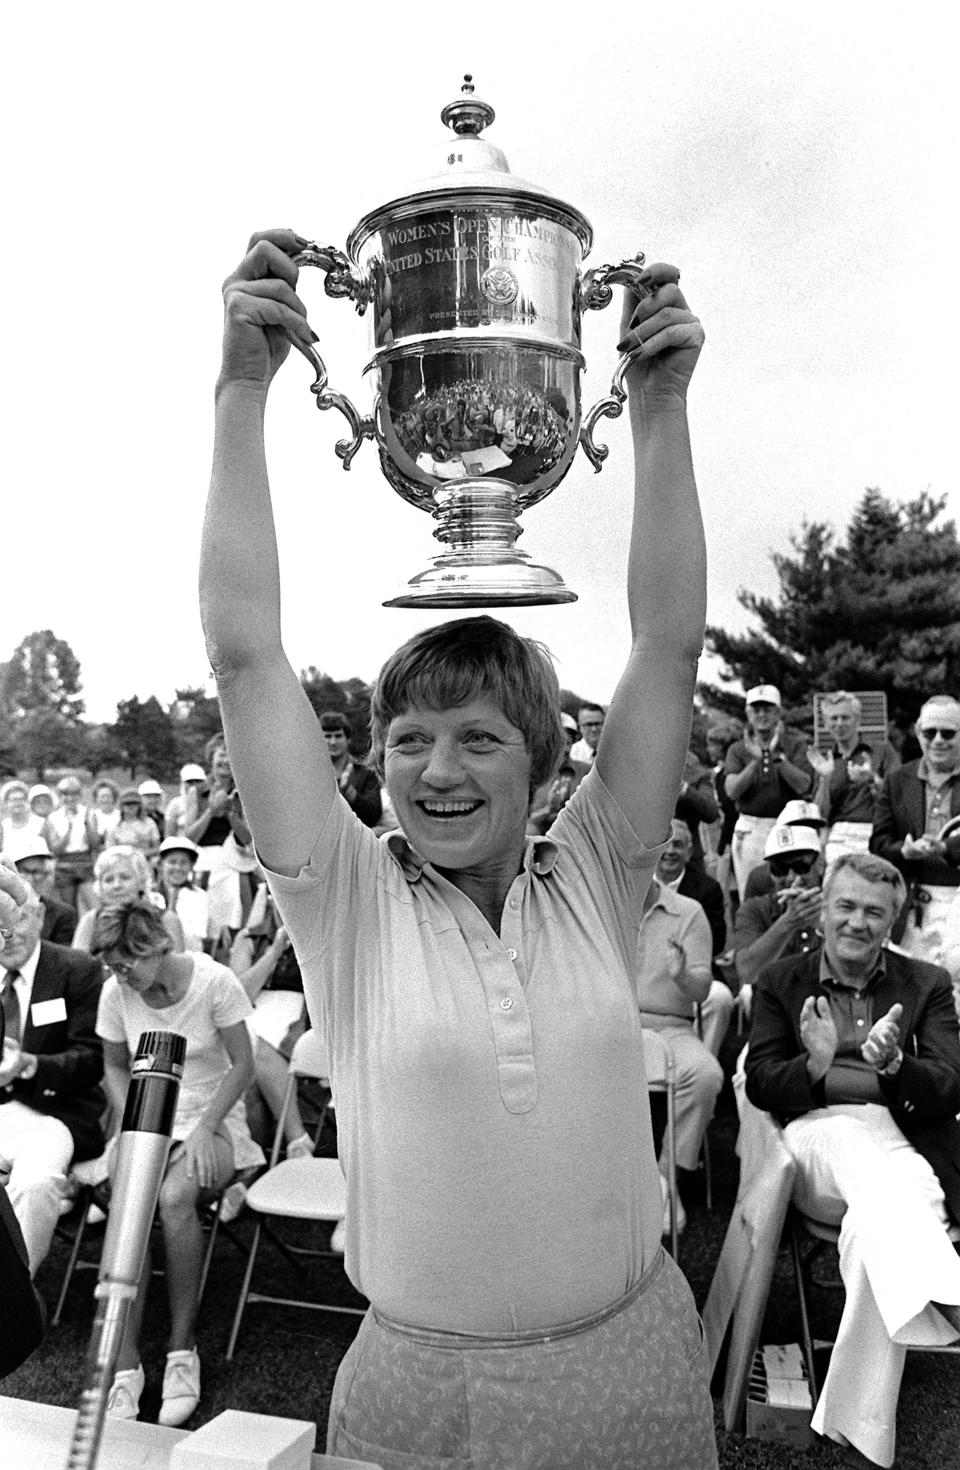 JoAnne Carner shows her trophy after winning the U.S. Women's Open Golf Tournment in suburban Philadelphia, Pa., Monday, July 12, 1976. (AP Photo/Hires)